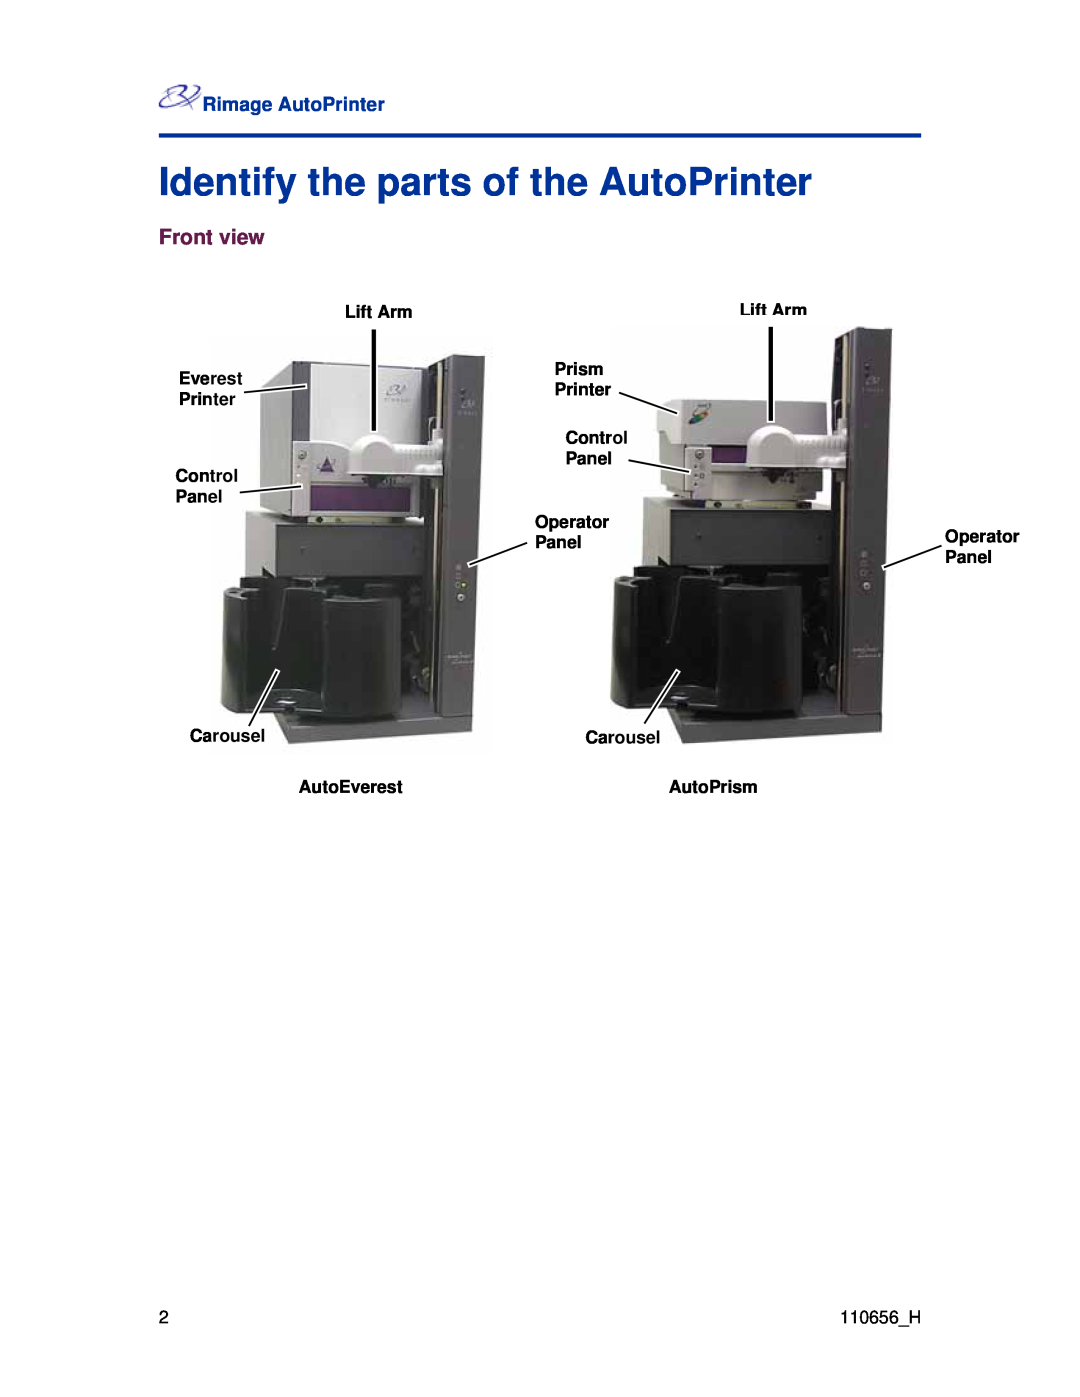 Rimage RAS10 Identify the parts of the AutoPrinter, Front view, Rimage AutoPrinter, Lift Arm, Everest, Prism, Carousel 